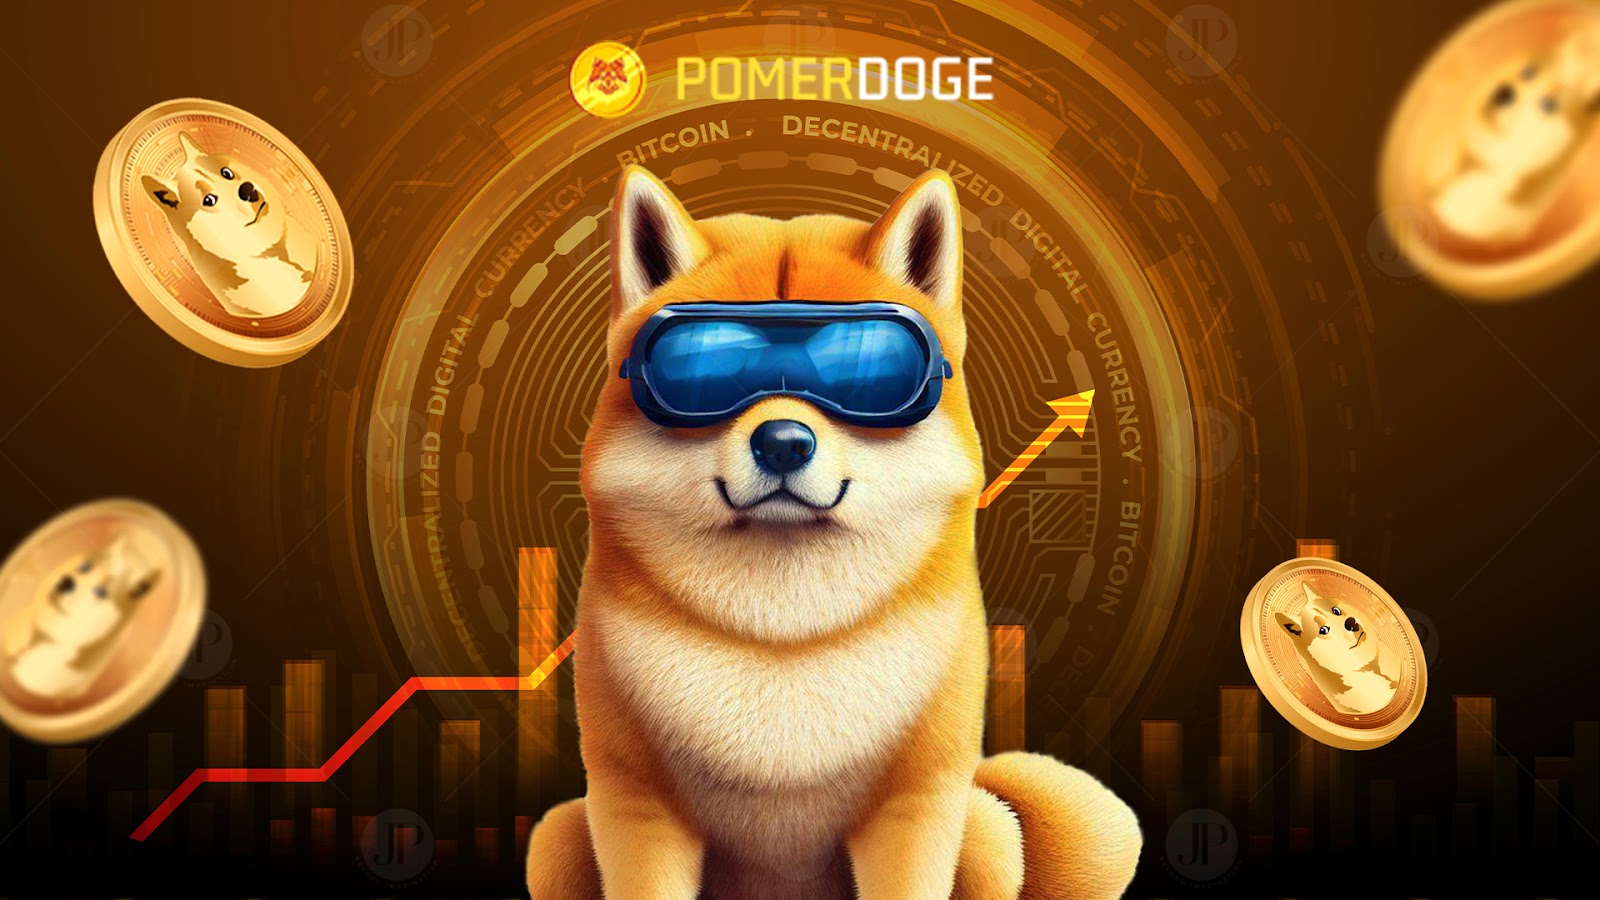 Pepe coin, Floki Inu, and Pomerdoge may rally in next bull run - 1